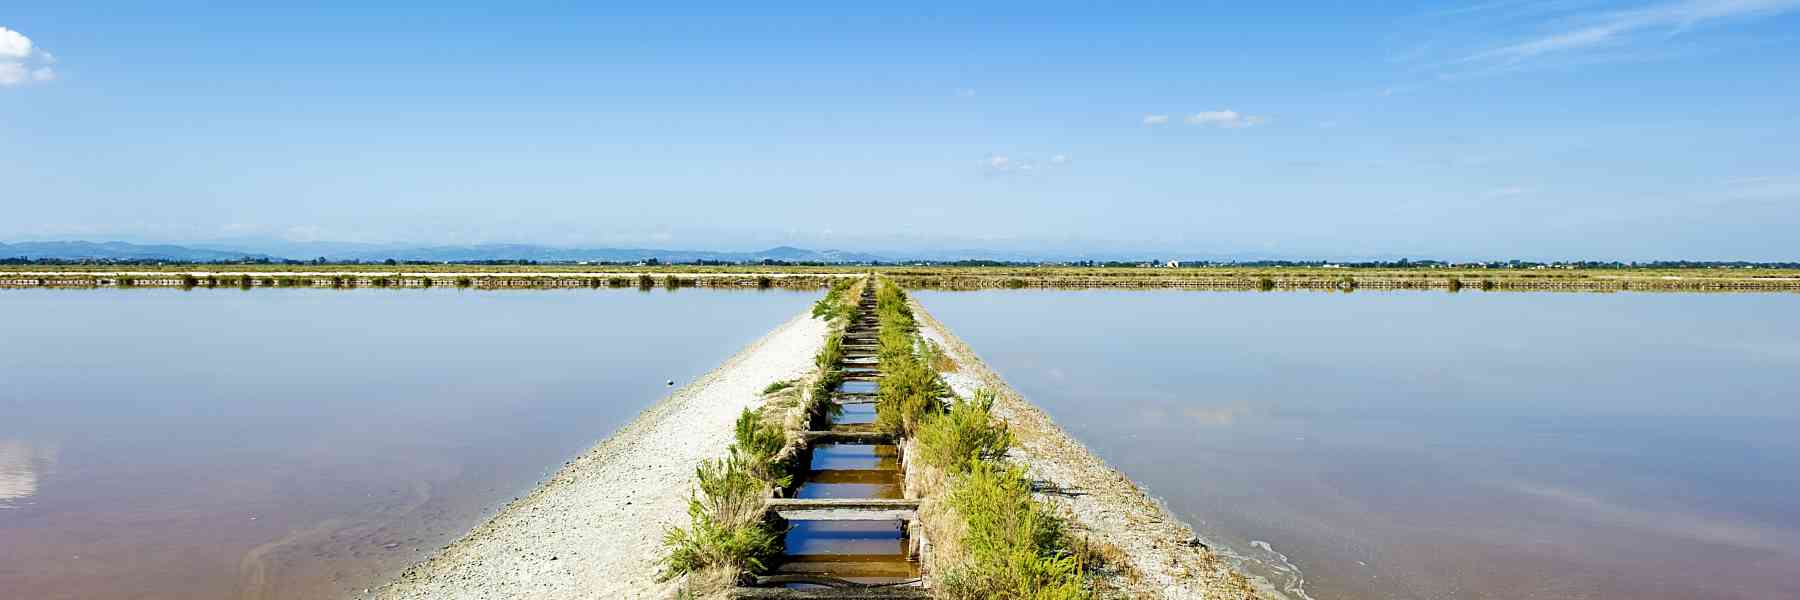 Saltpans and water governance: pumps and lifting systems